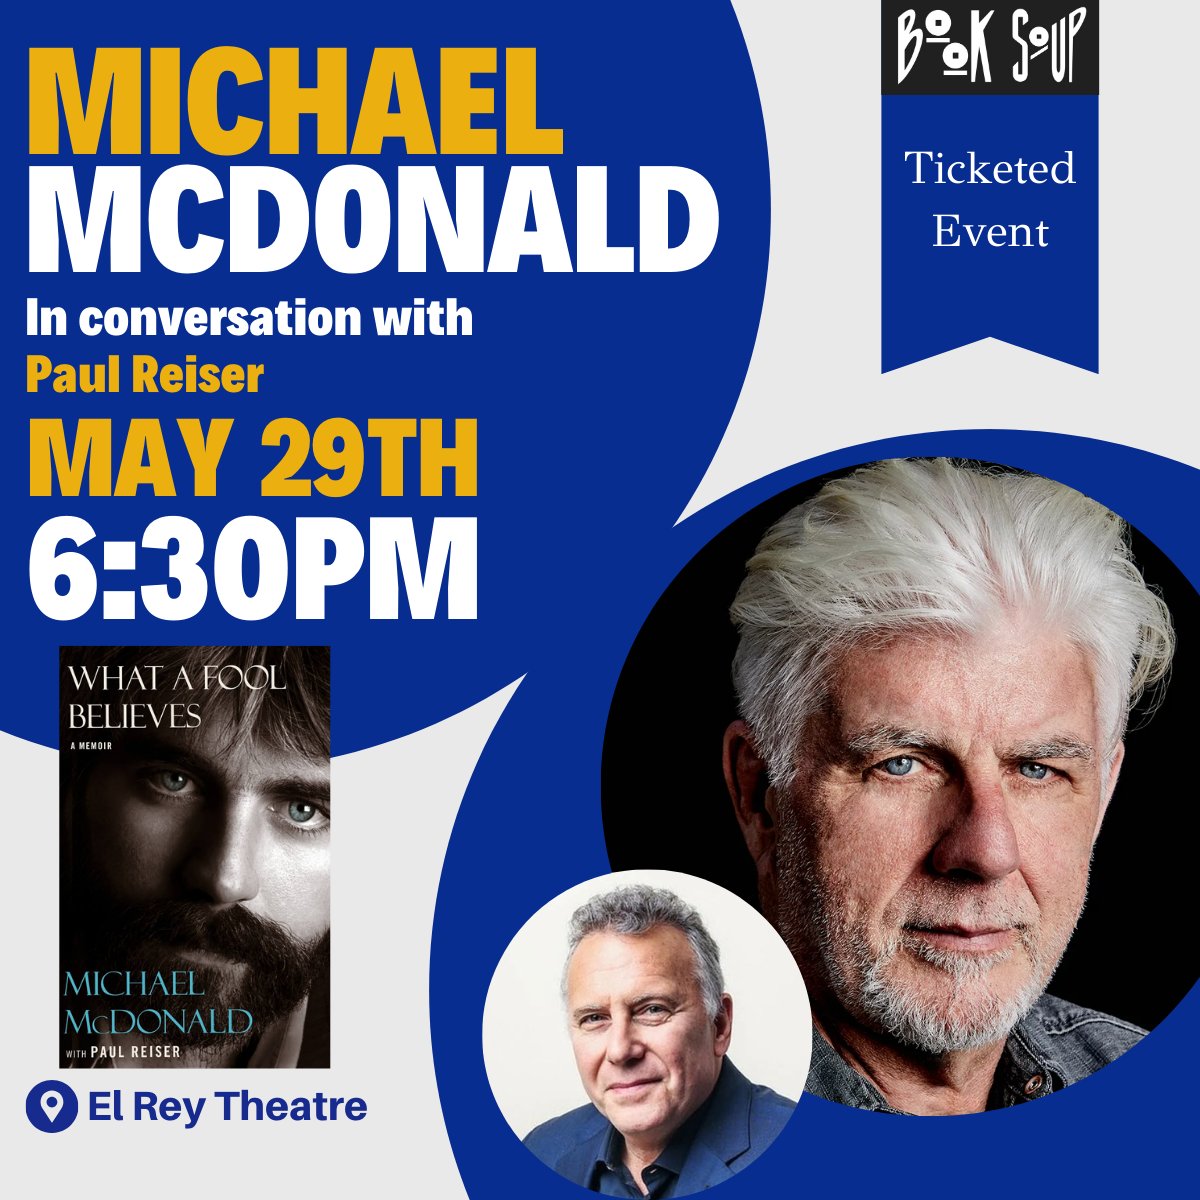 Don't miss @MichaelMcD_Real & co-author @PaulReiser discussing WHAT A FOOL BELEIVES: A MEMOIR live in-person at @elreytheatre on Wednesday, May 29th at a special time - 6:30pm! Get your tickets here: bit.ly/3QpXmDG @deystreet